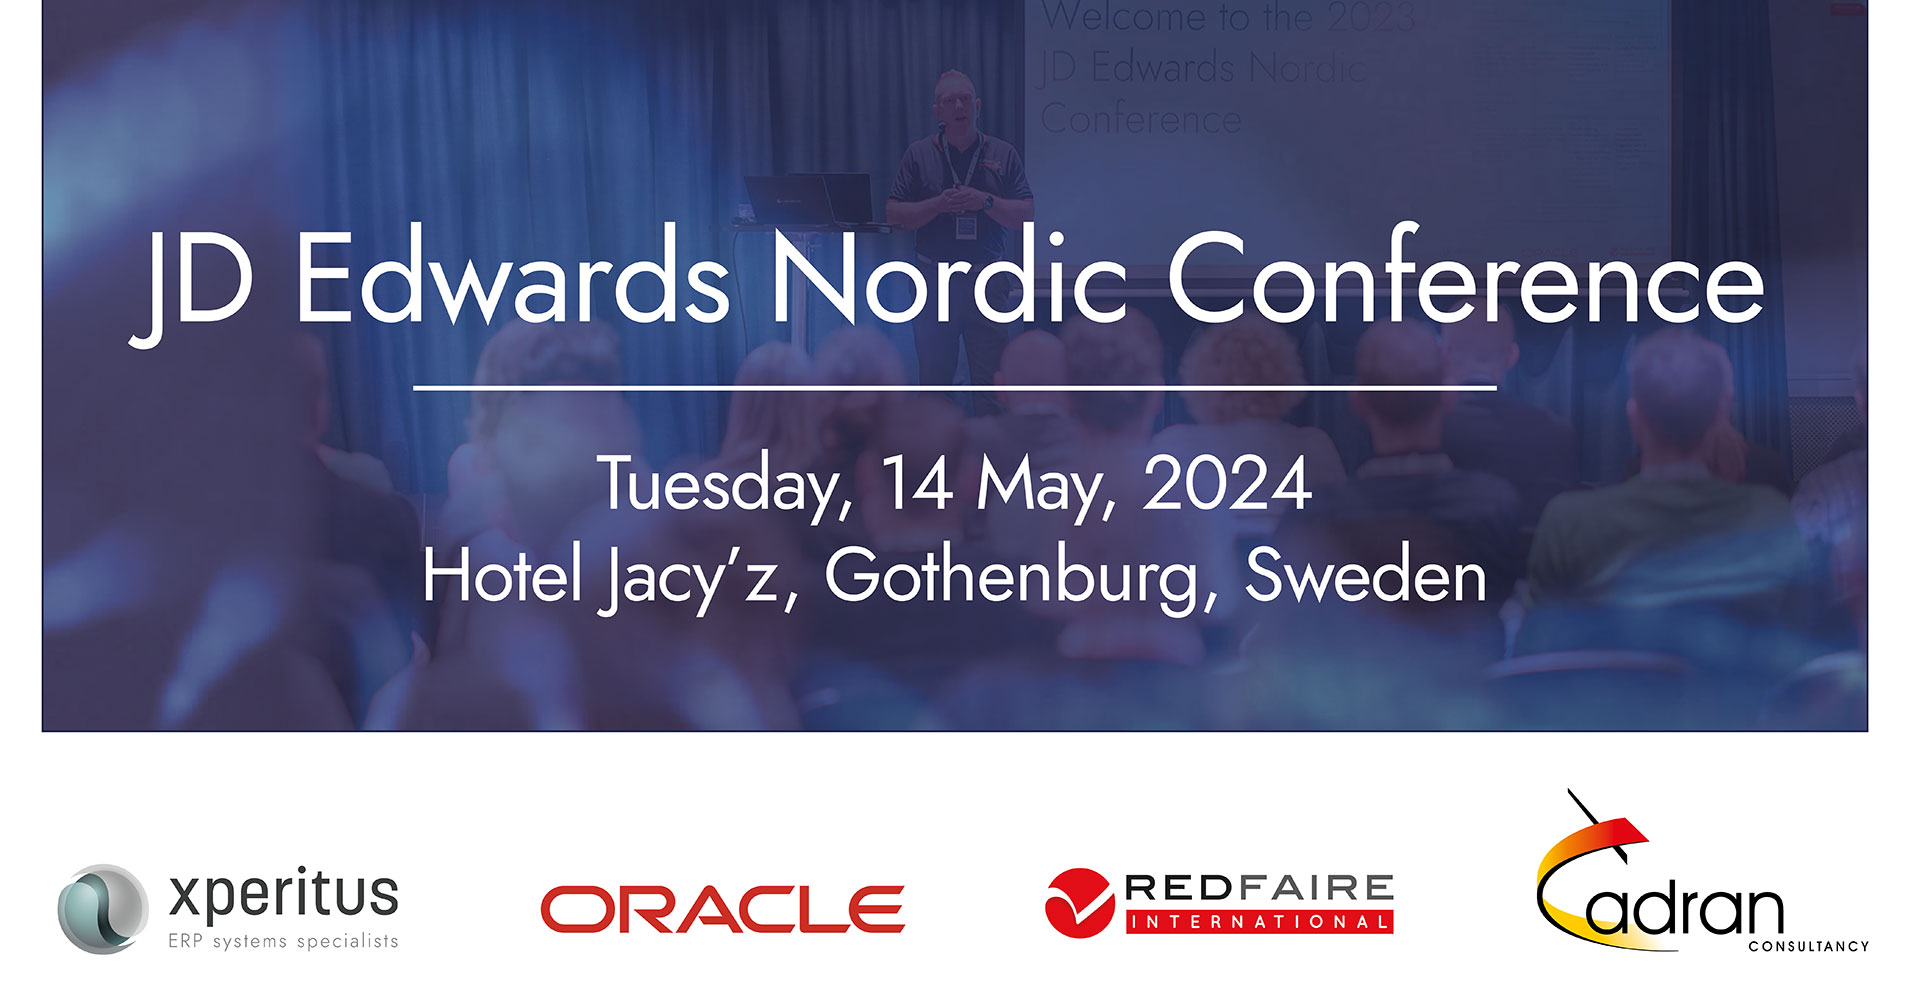 Welcome to the JD Edwards Nordic Conference 2024!